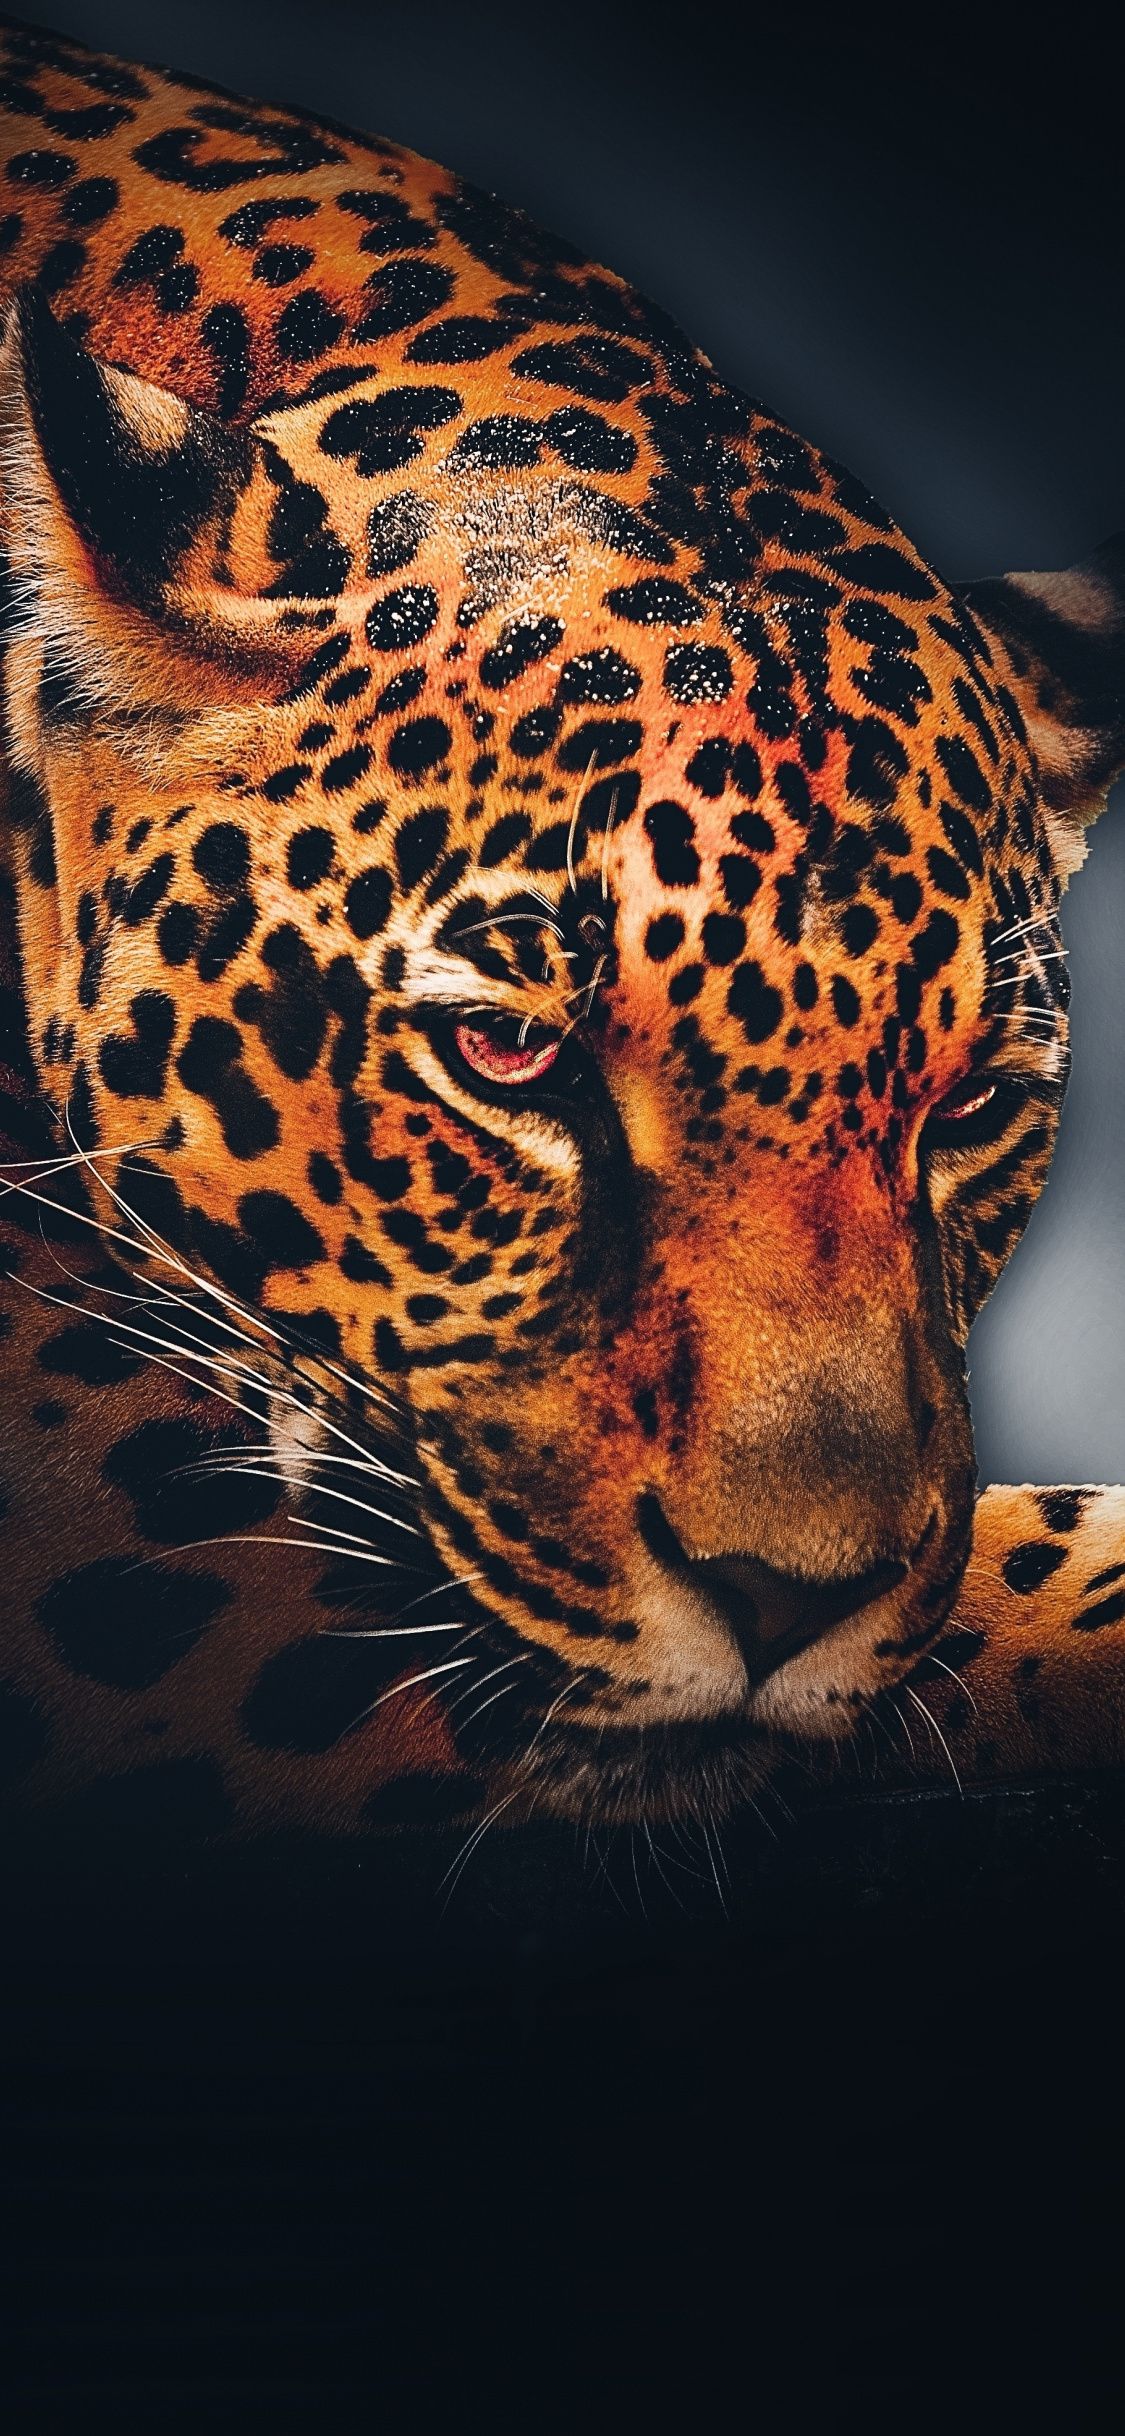 Leopard, animal, relaxed, portrait wallpaper. Animals